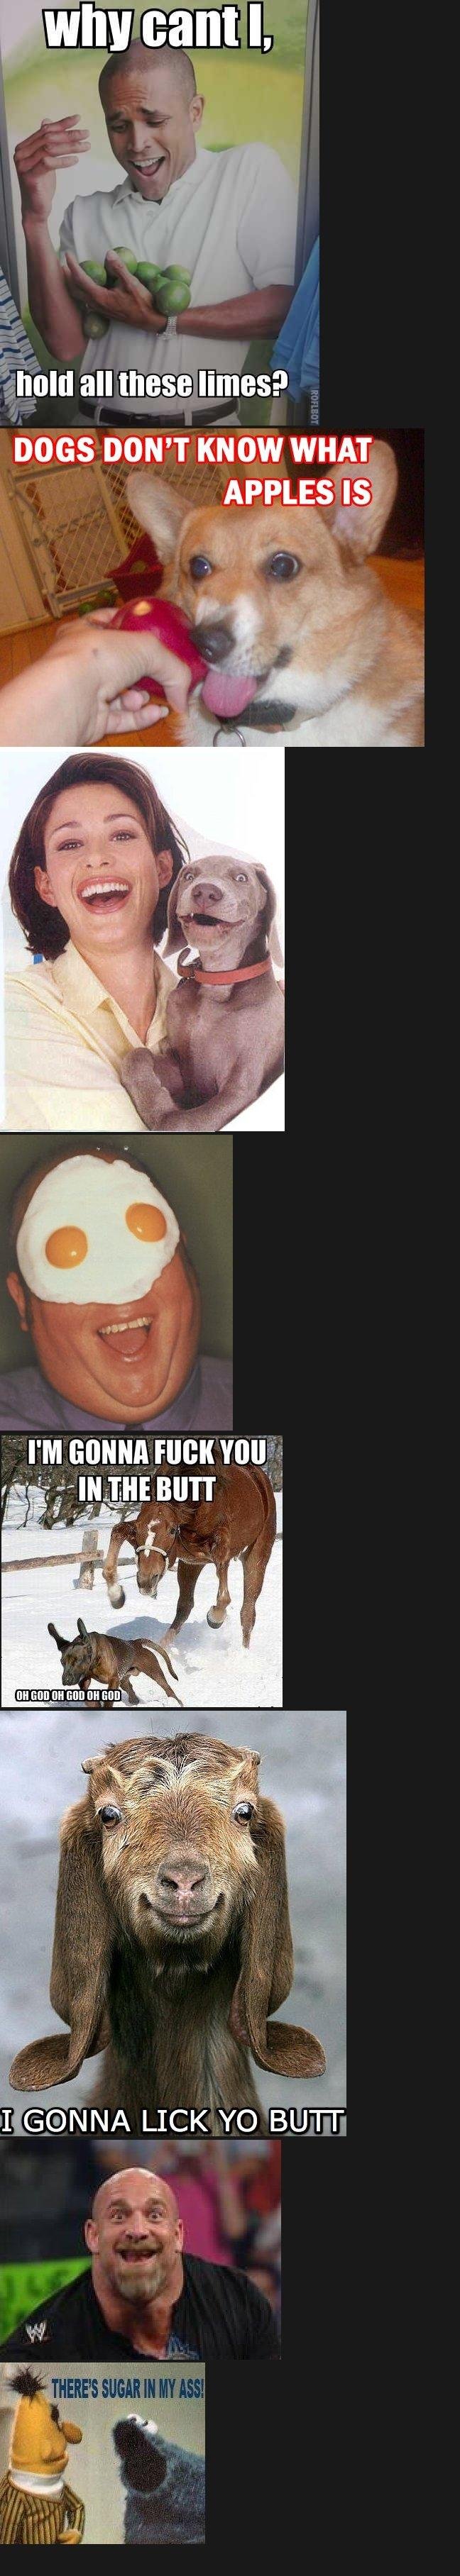 Haha Eggs. lol wut. 3. -hold all thijs%: Itmes? DOGS DON' T KNOW WHAT MT I' M GONNA FUCK. I laughed my ass off at the horse one because it reminded me of this black kid at my school who (jokingly of course) walks up behinds people and whispers in the